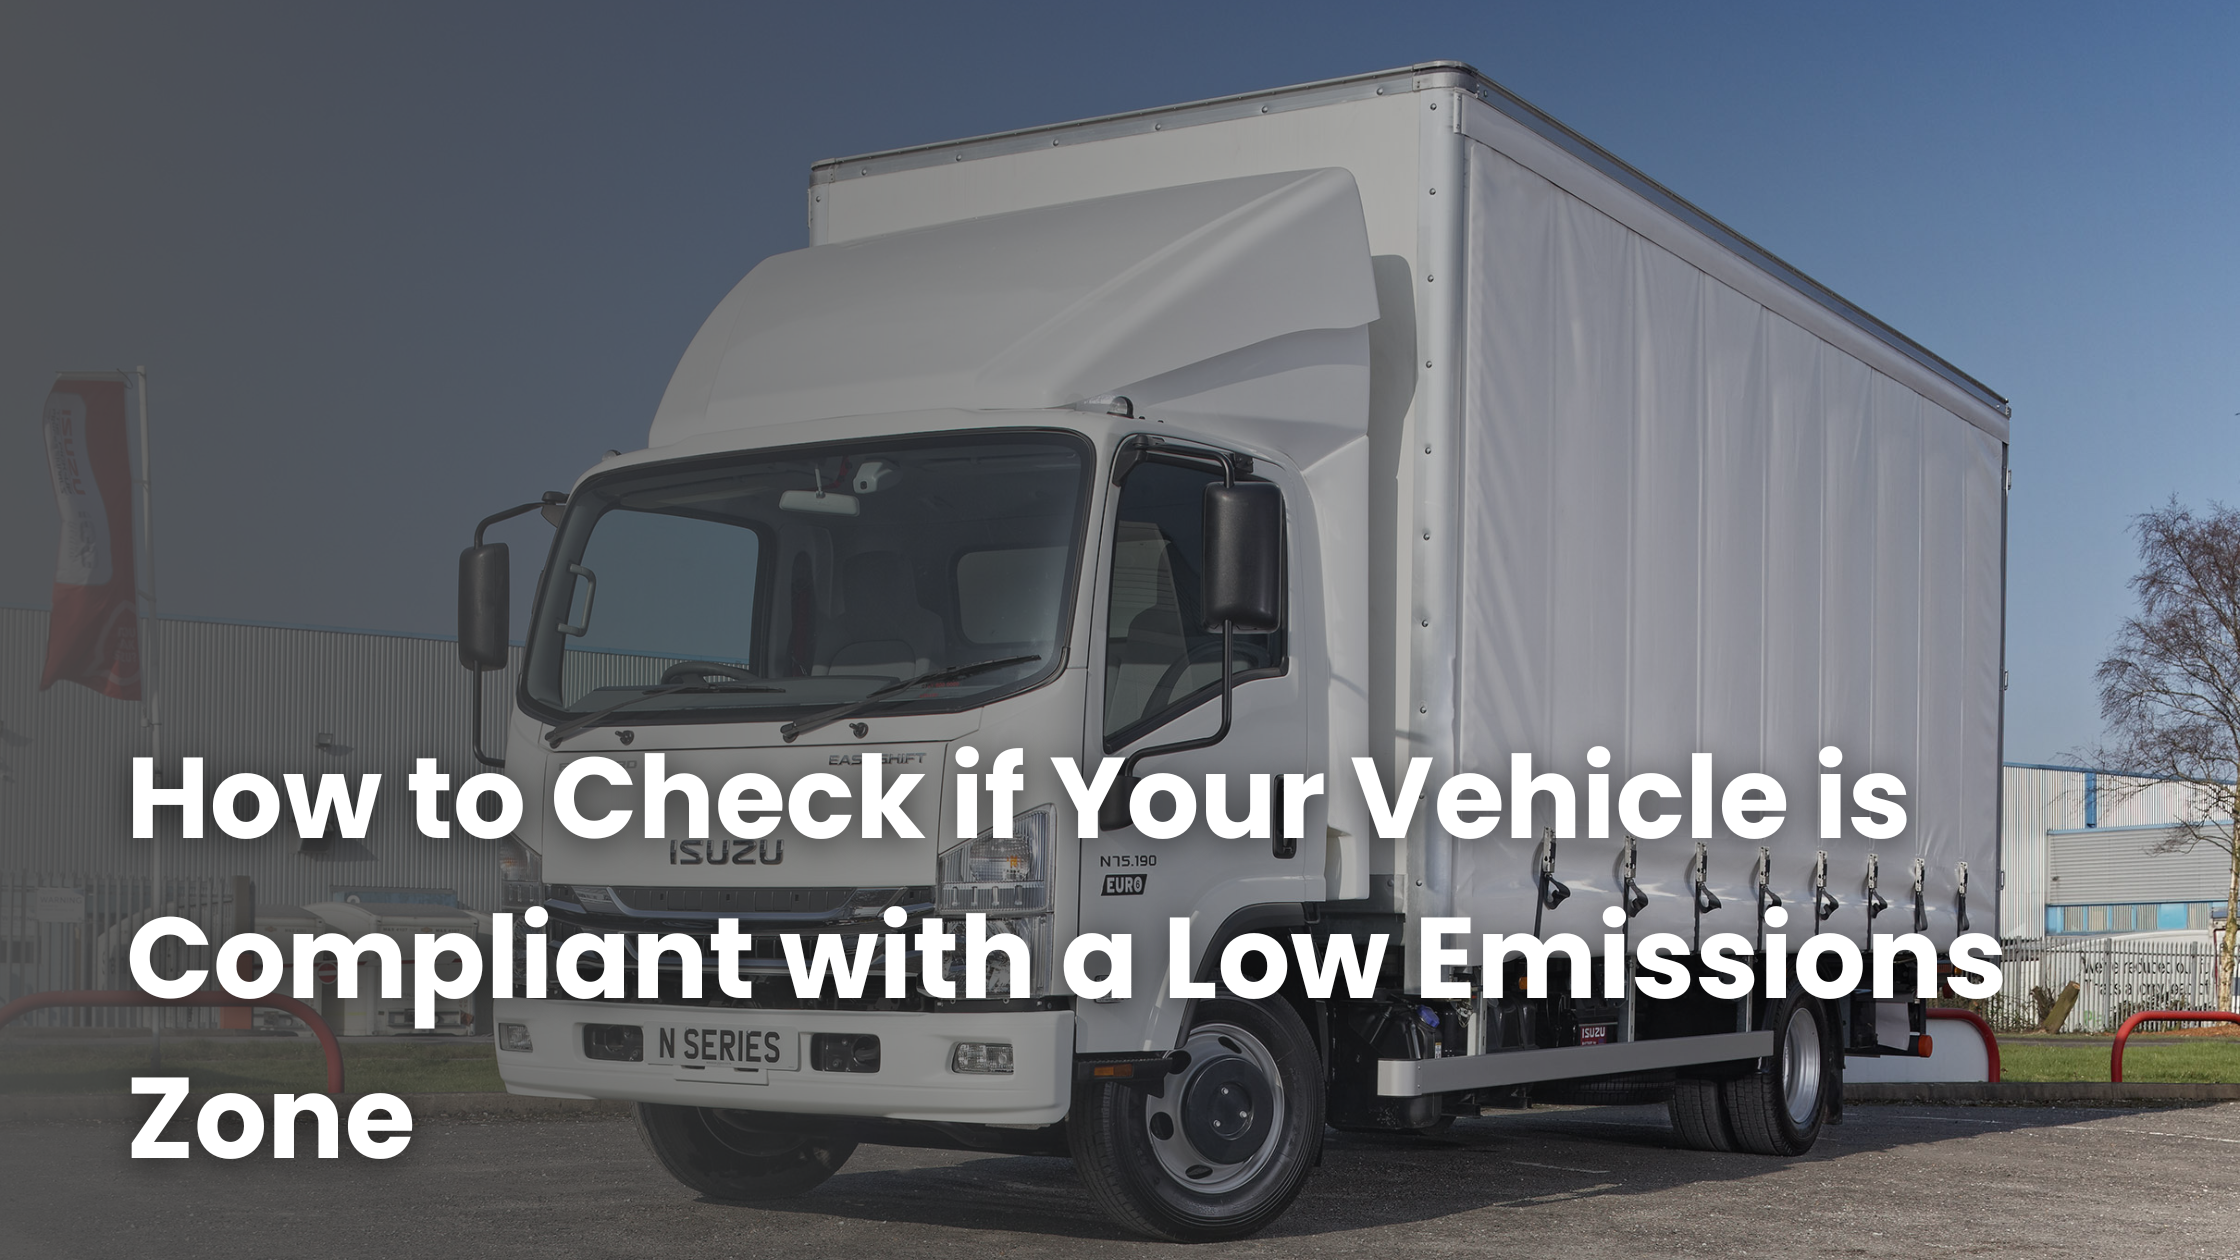 How to Check if Your Vehicle is Compliant with a Low Emissions Zone